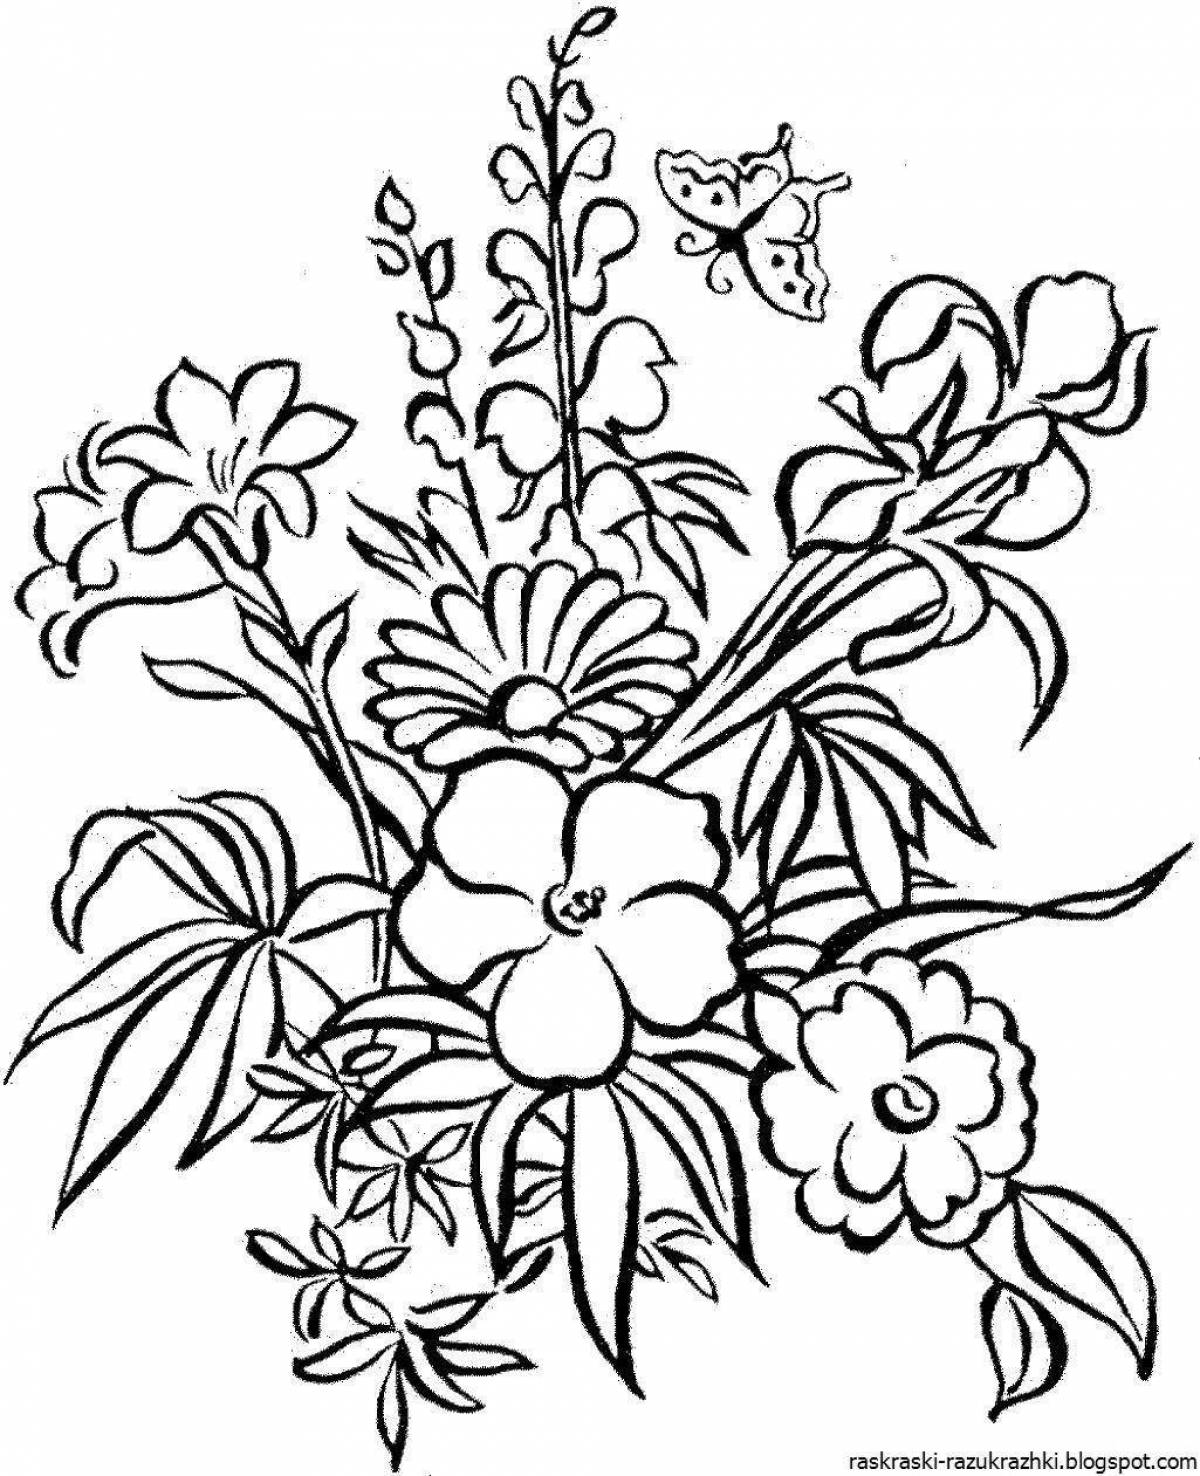 Colorful coloring picture of flowers